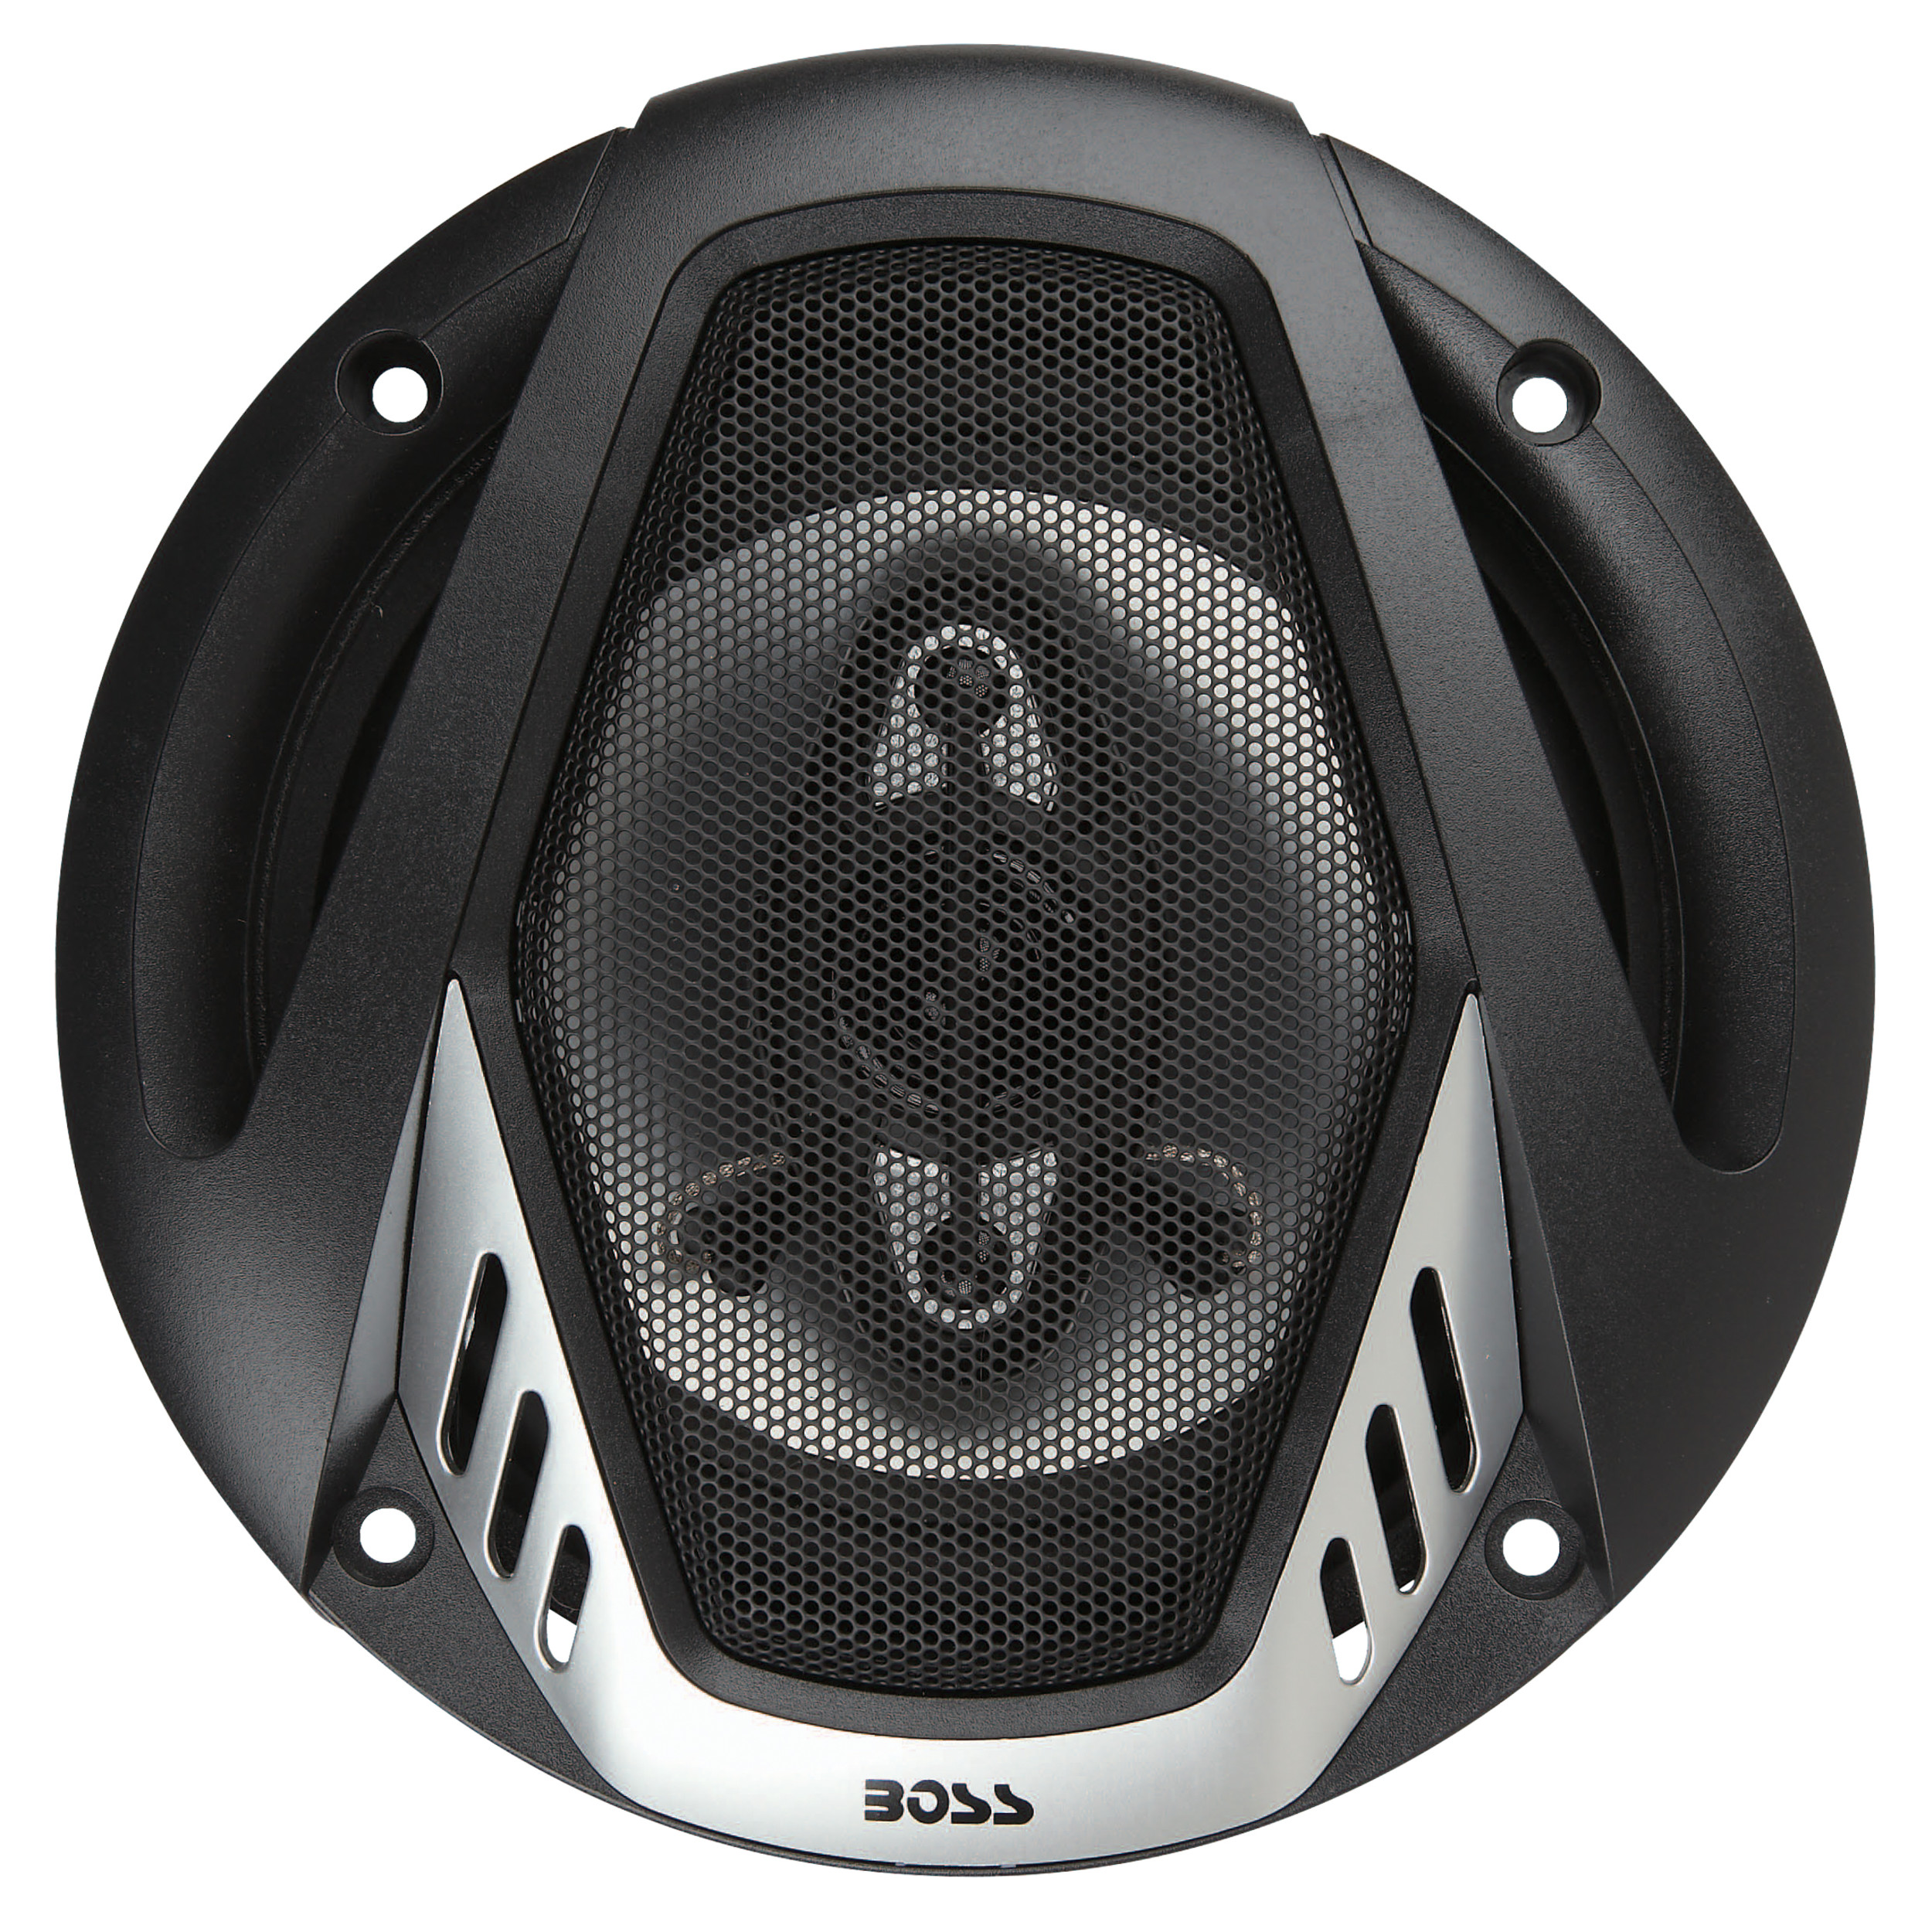 BOSS NX524 5.25" 300W & 6.5" 400W 4 Way Car Audio Coaxial Speakers (4 Pack) - image 4 of 10